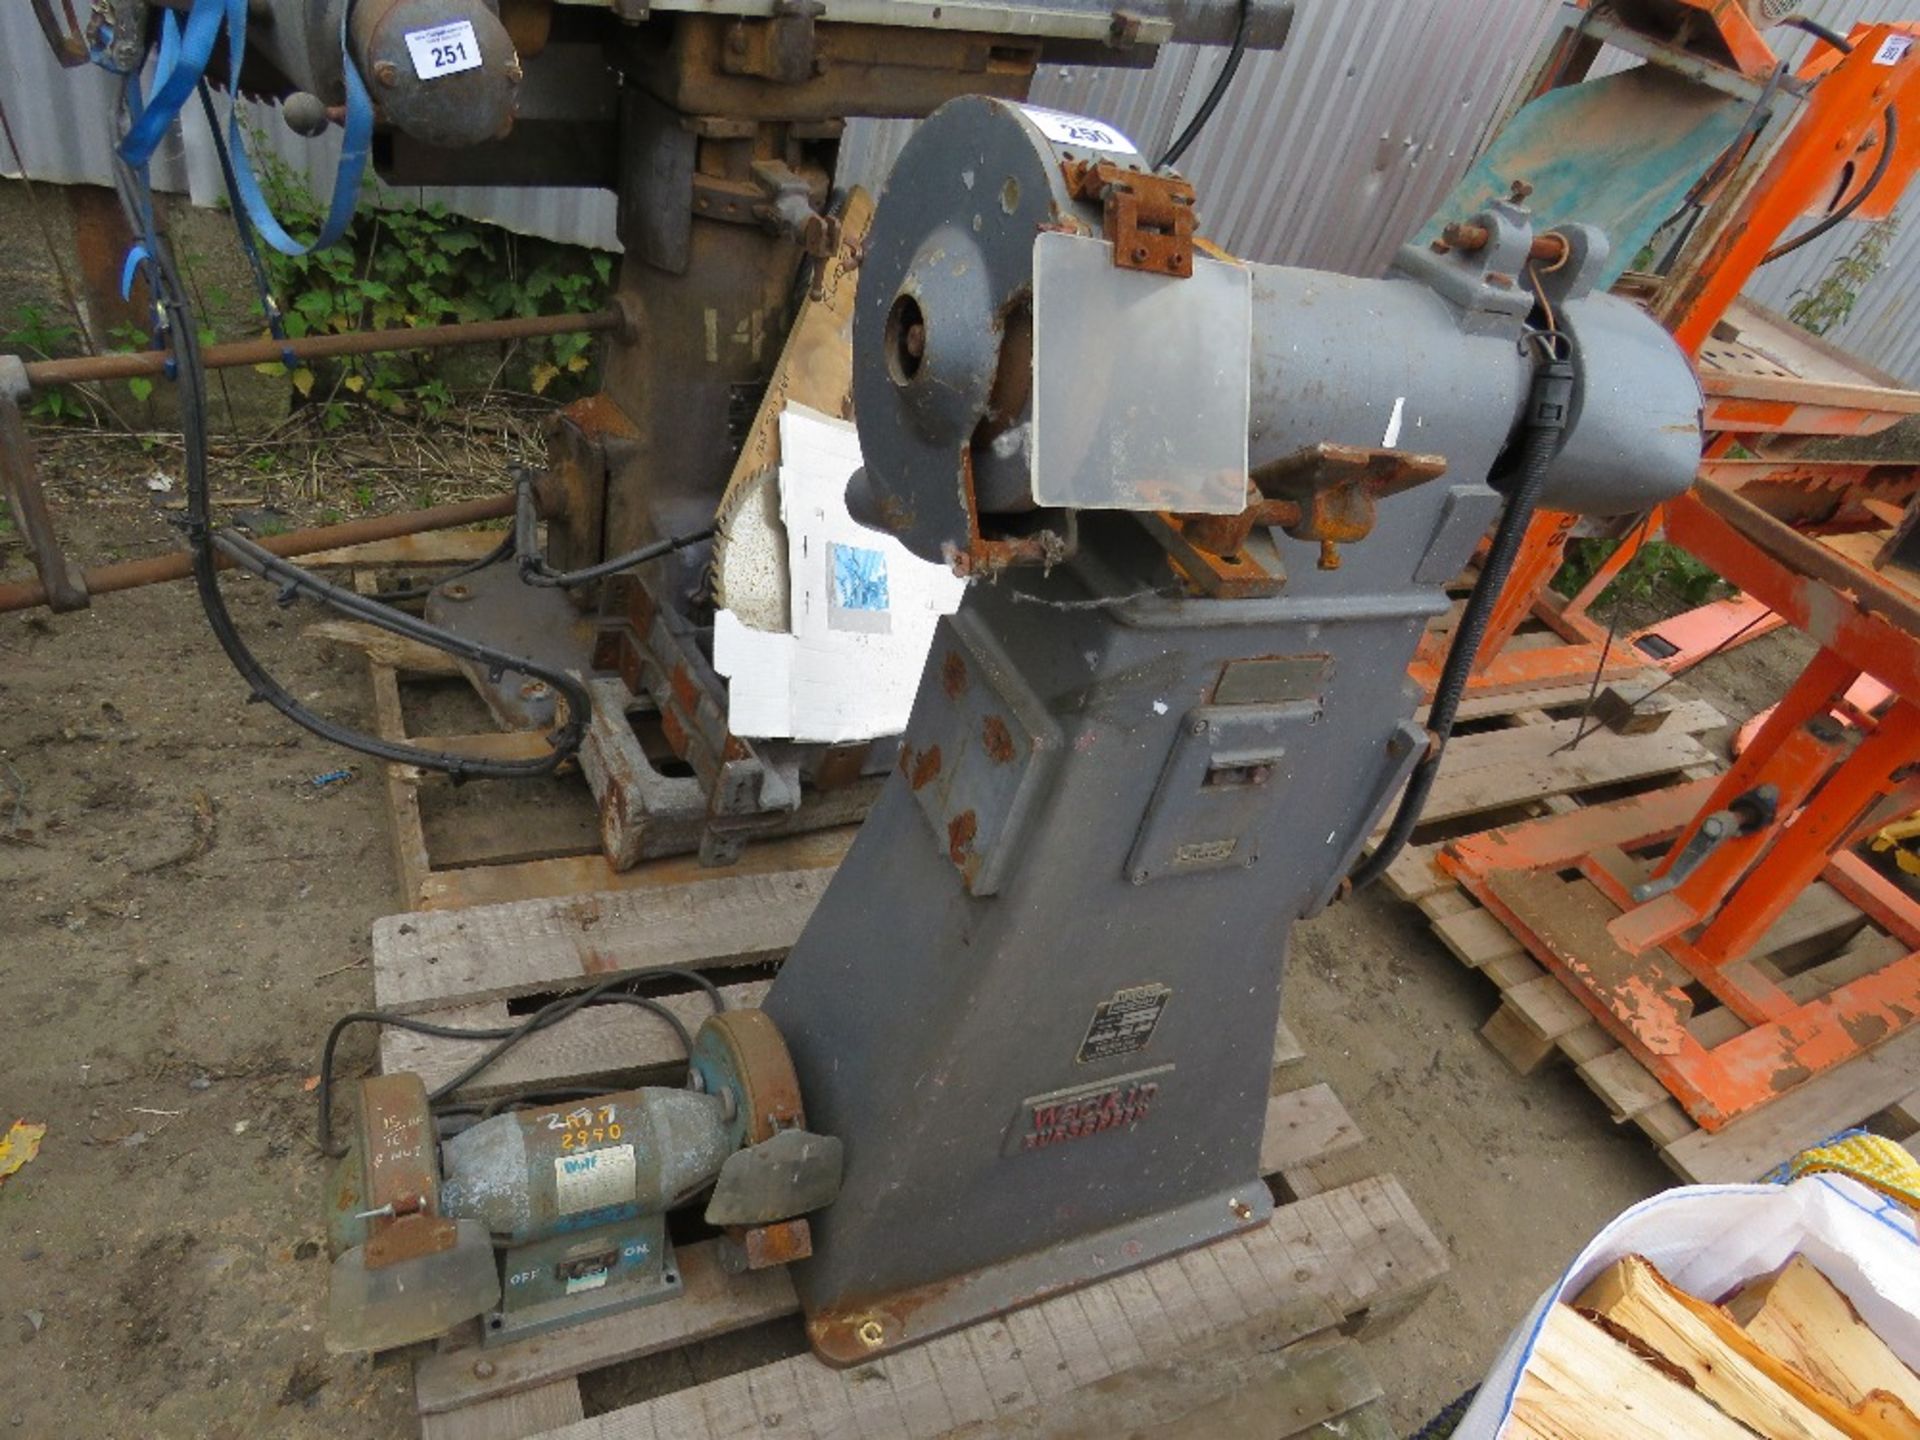 PILLAR GRINDER PLUS A BENCH GRINDER. SOURCED FROM DEPOT CLOSURE. - Image 3 of 5